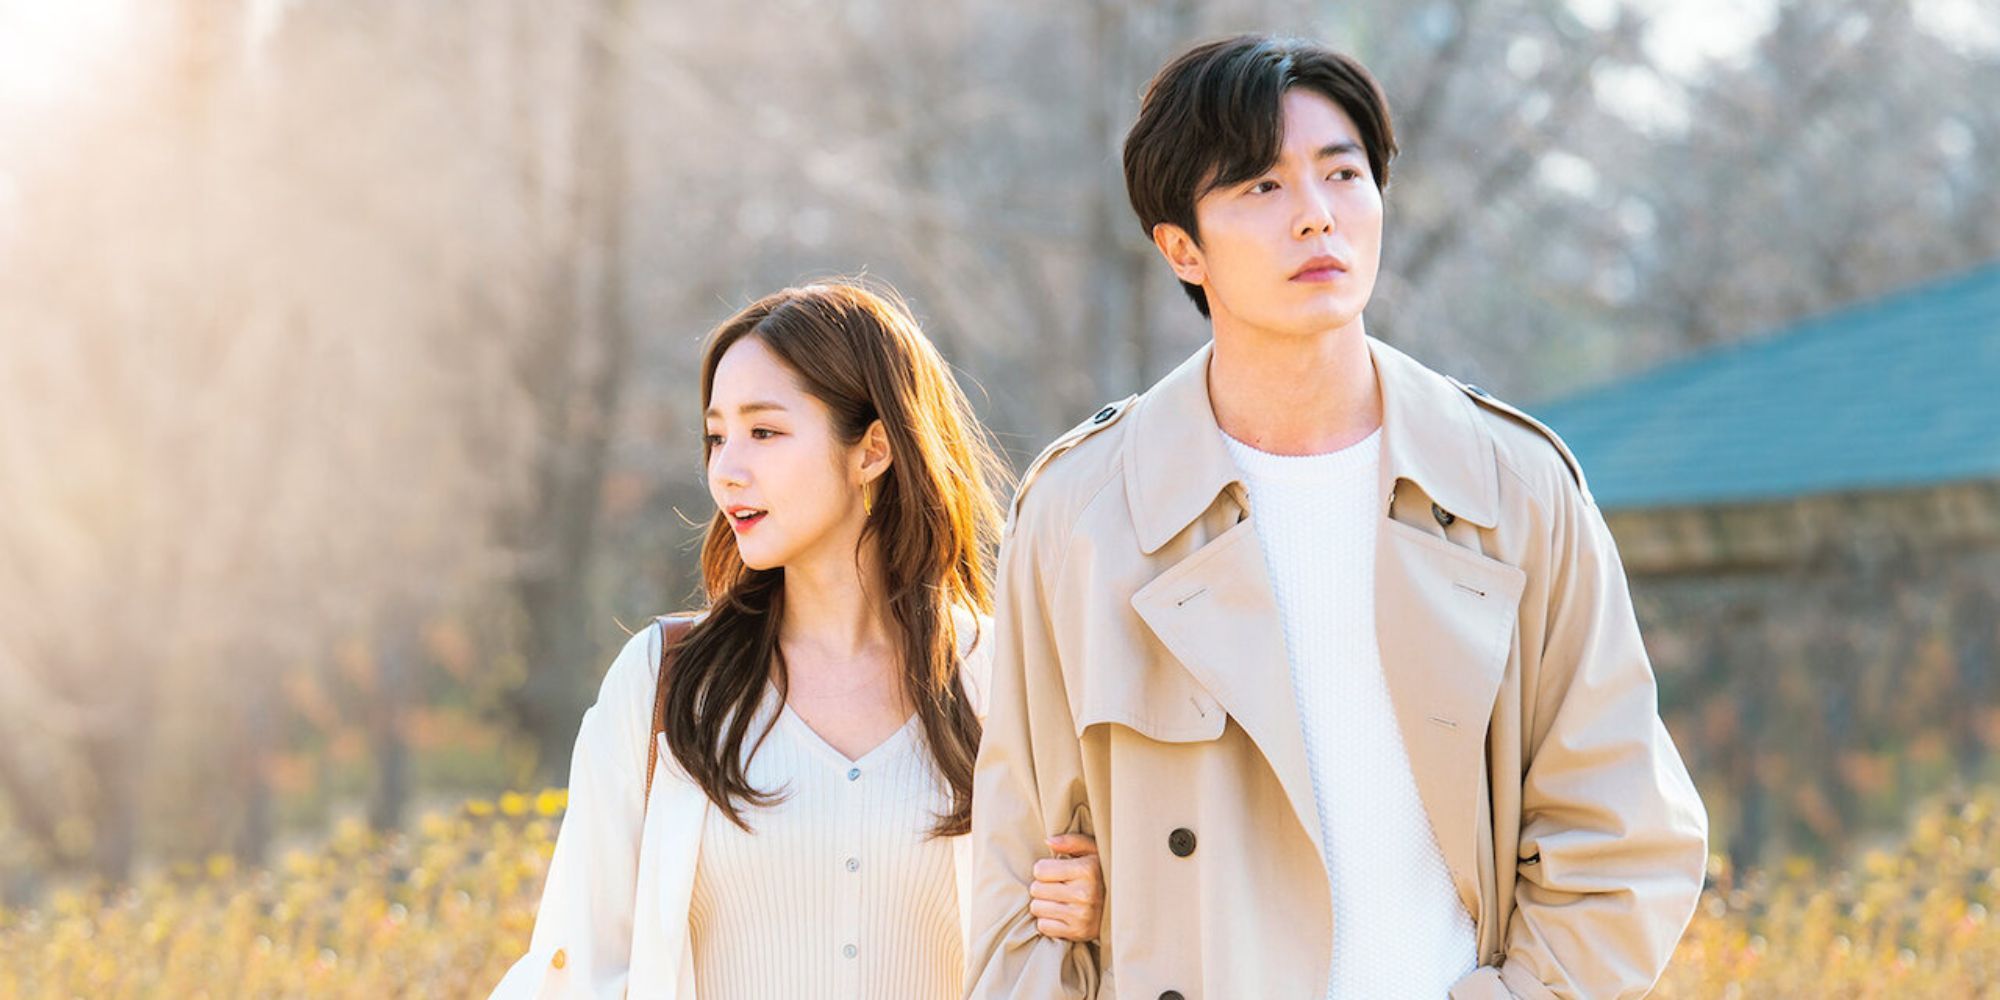 Sun Deok Mi and Ryan Gold from Her Private Life taking a walk in the field